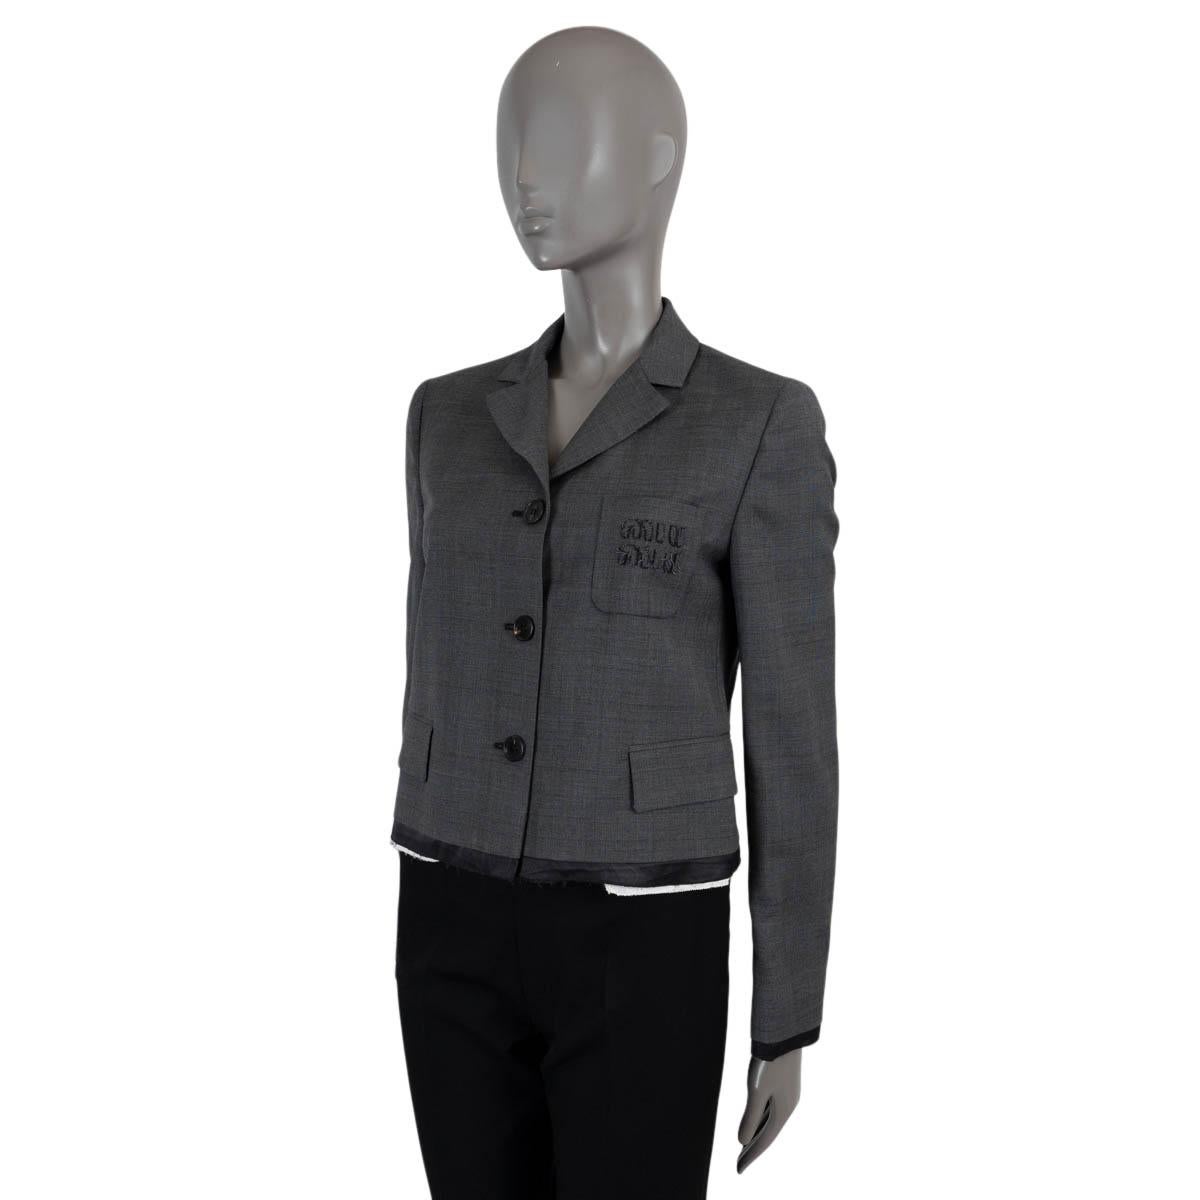 100% authentic Miu Miu cropped blazer in dark grey wool (100%). Features a boxy silhouette, raw hem, notch lapels, two flap pockets at the waist and a logo embroidered patch pocket at the chest. Closes with buttons on the front and is lined in